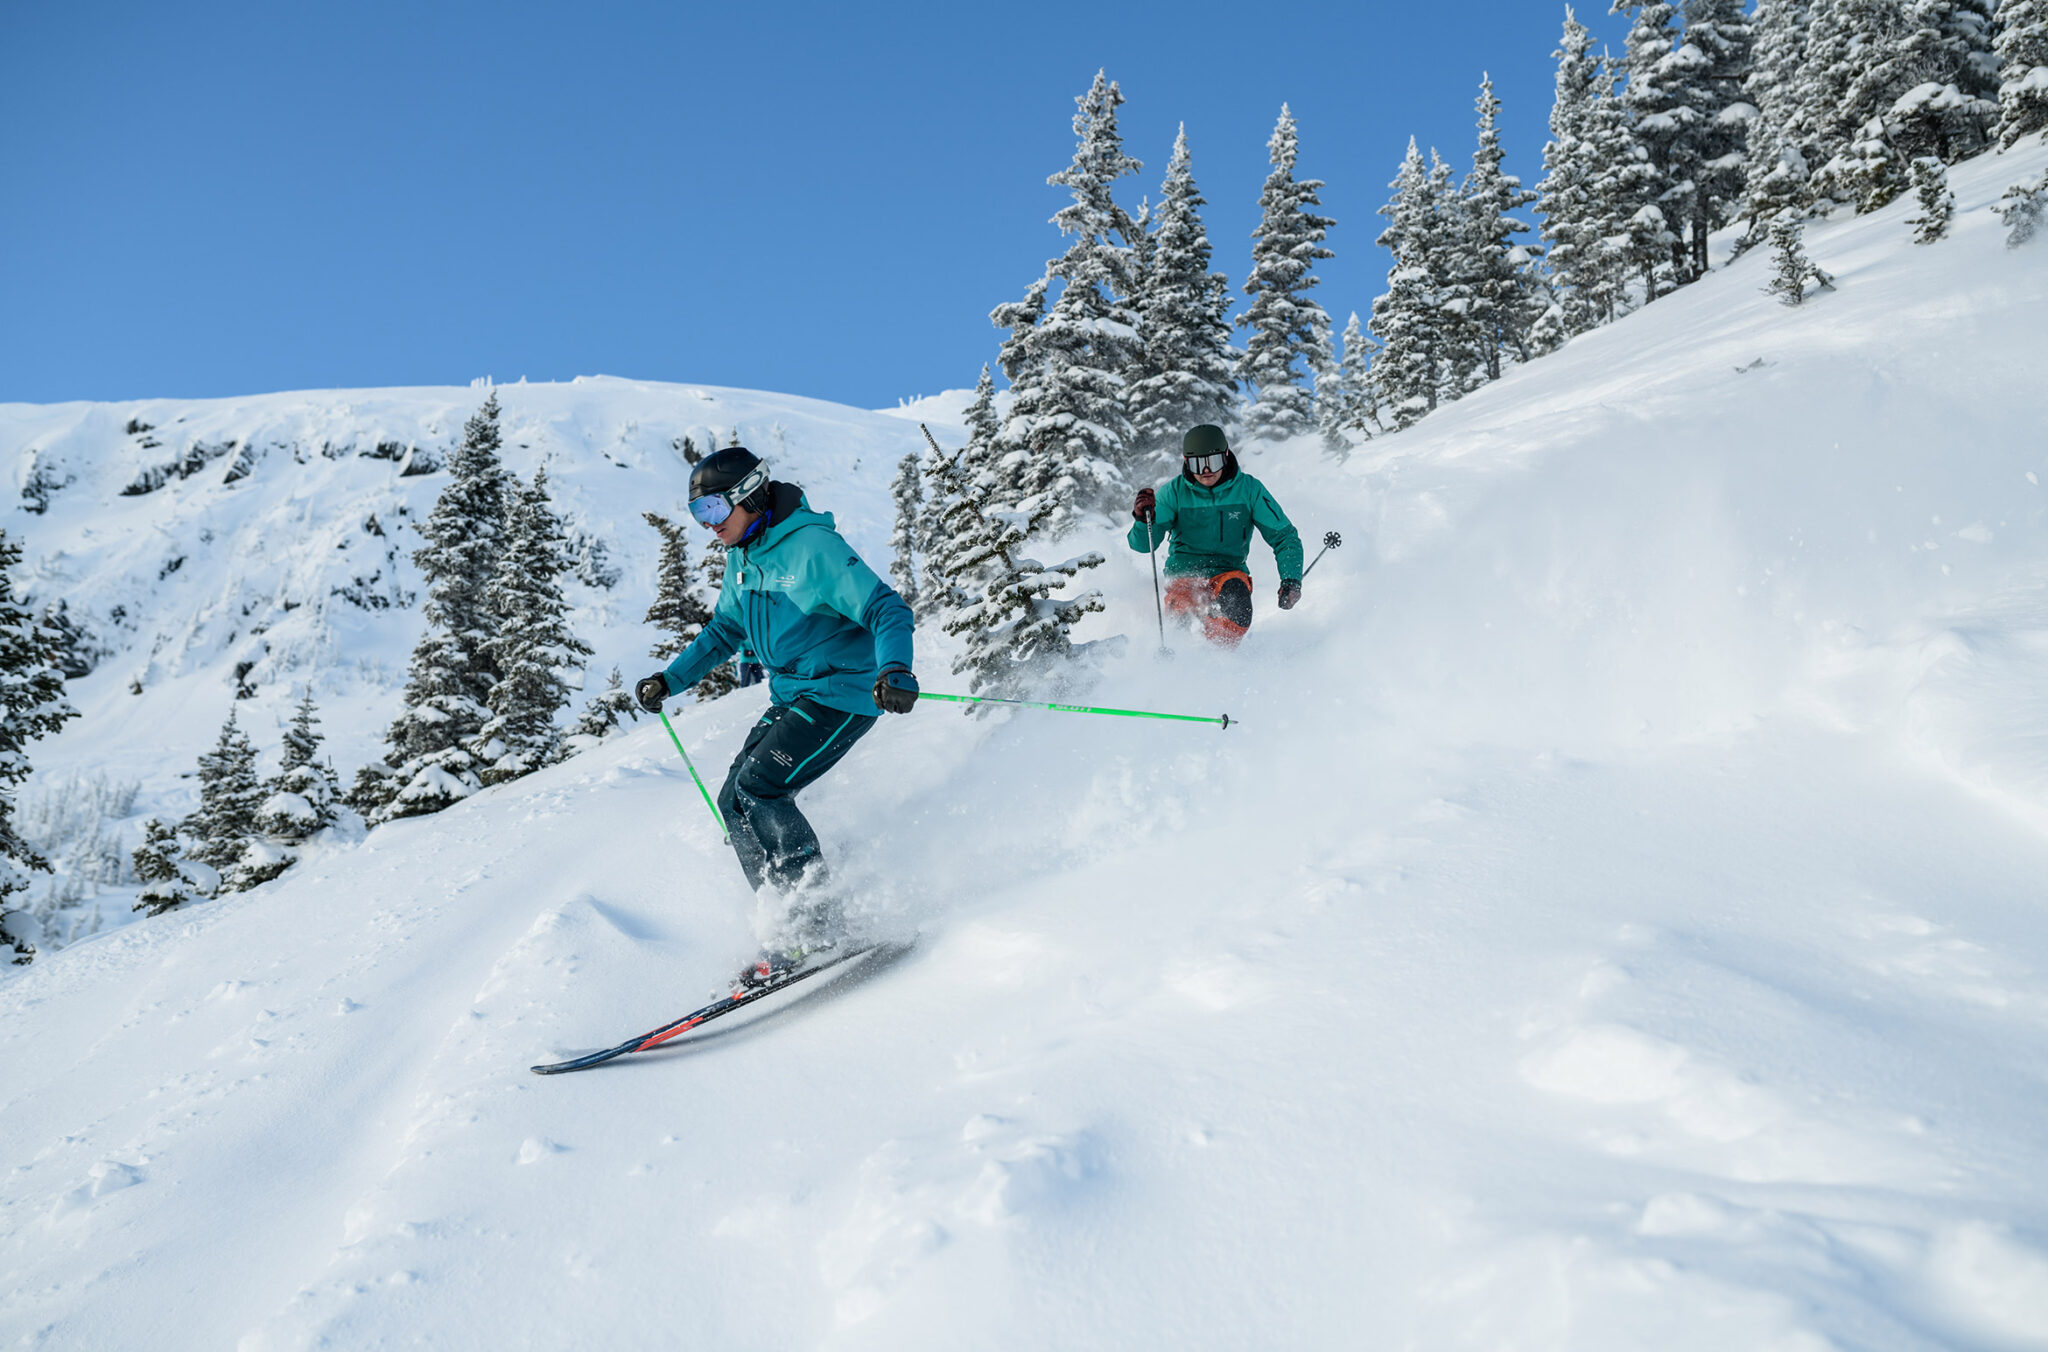 A ski instructor takes some turns in the powder with a student following behind.